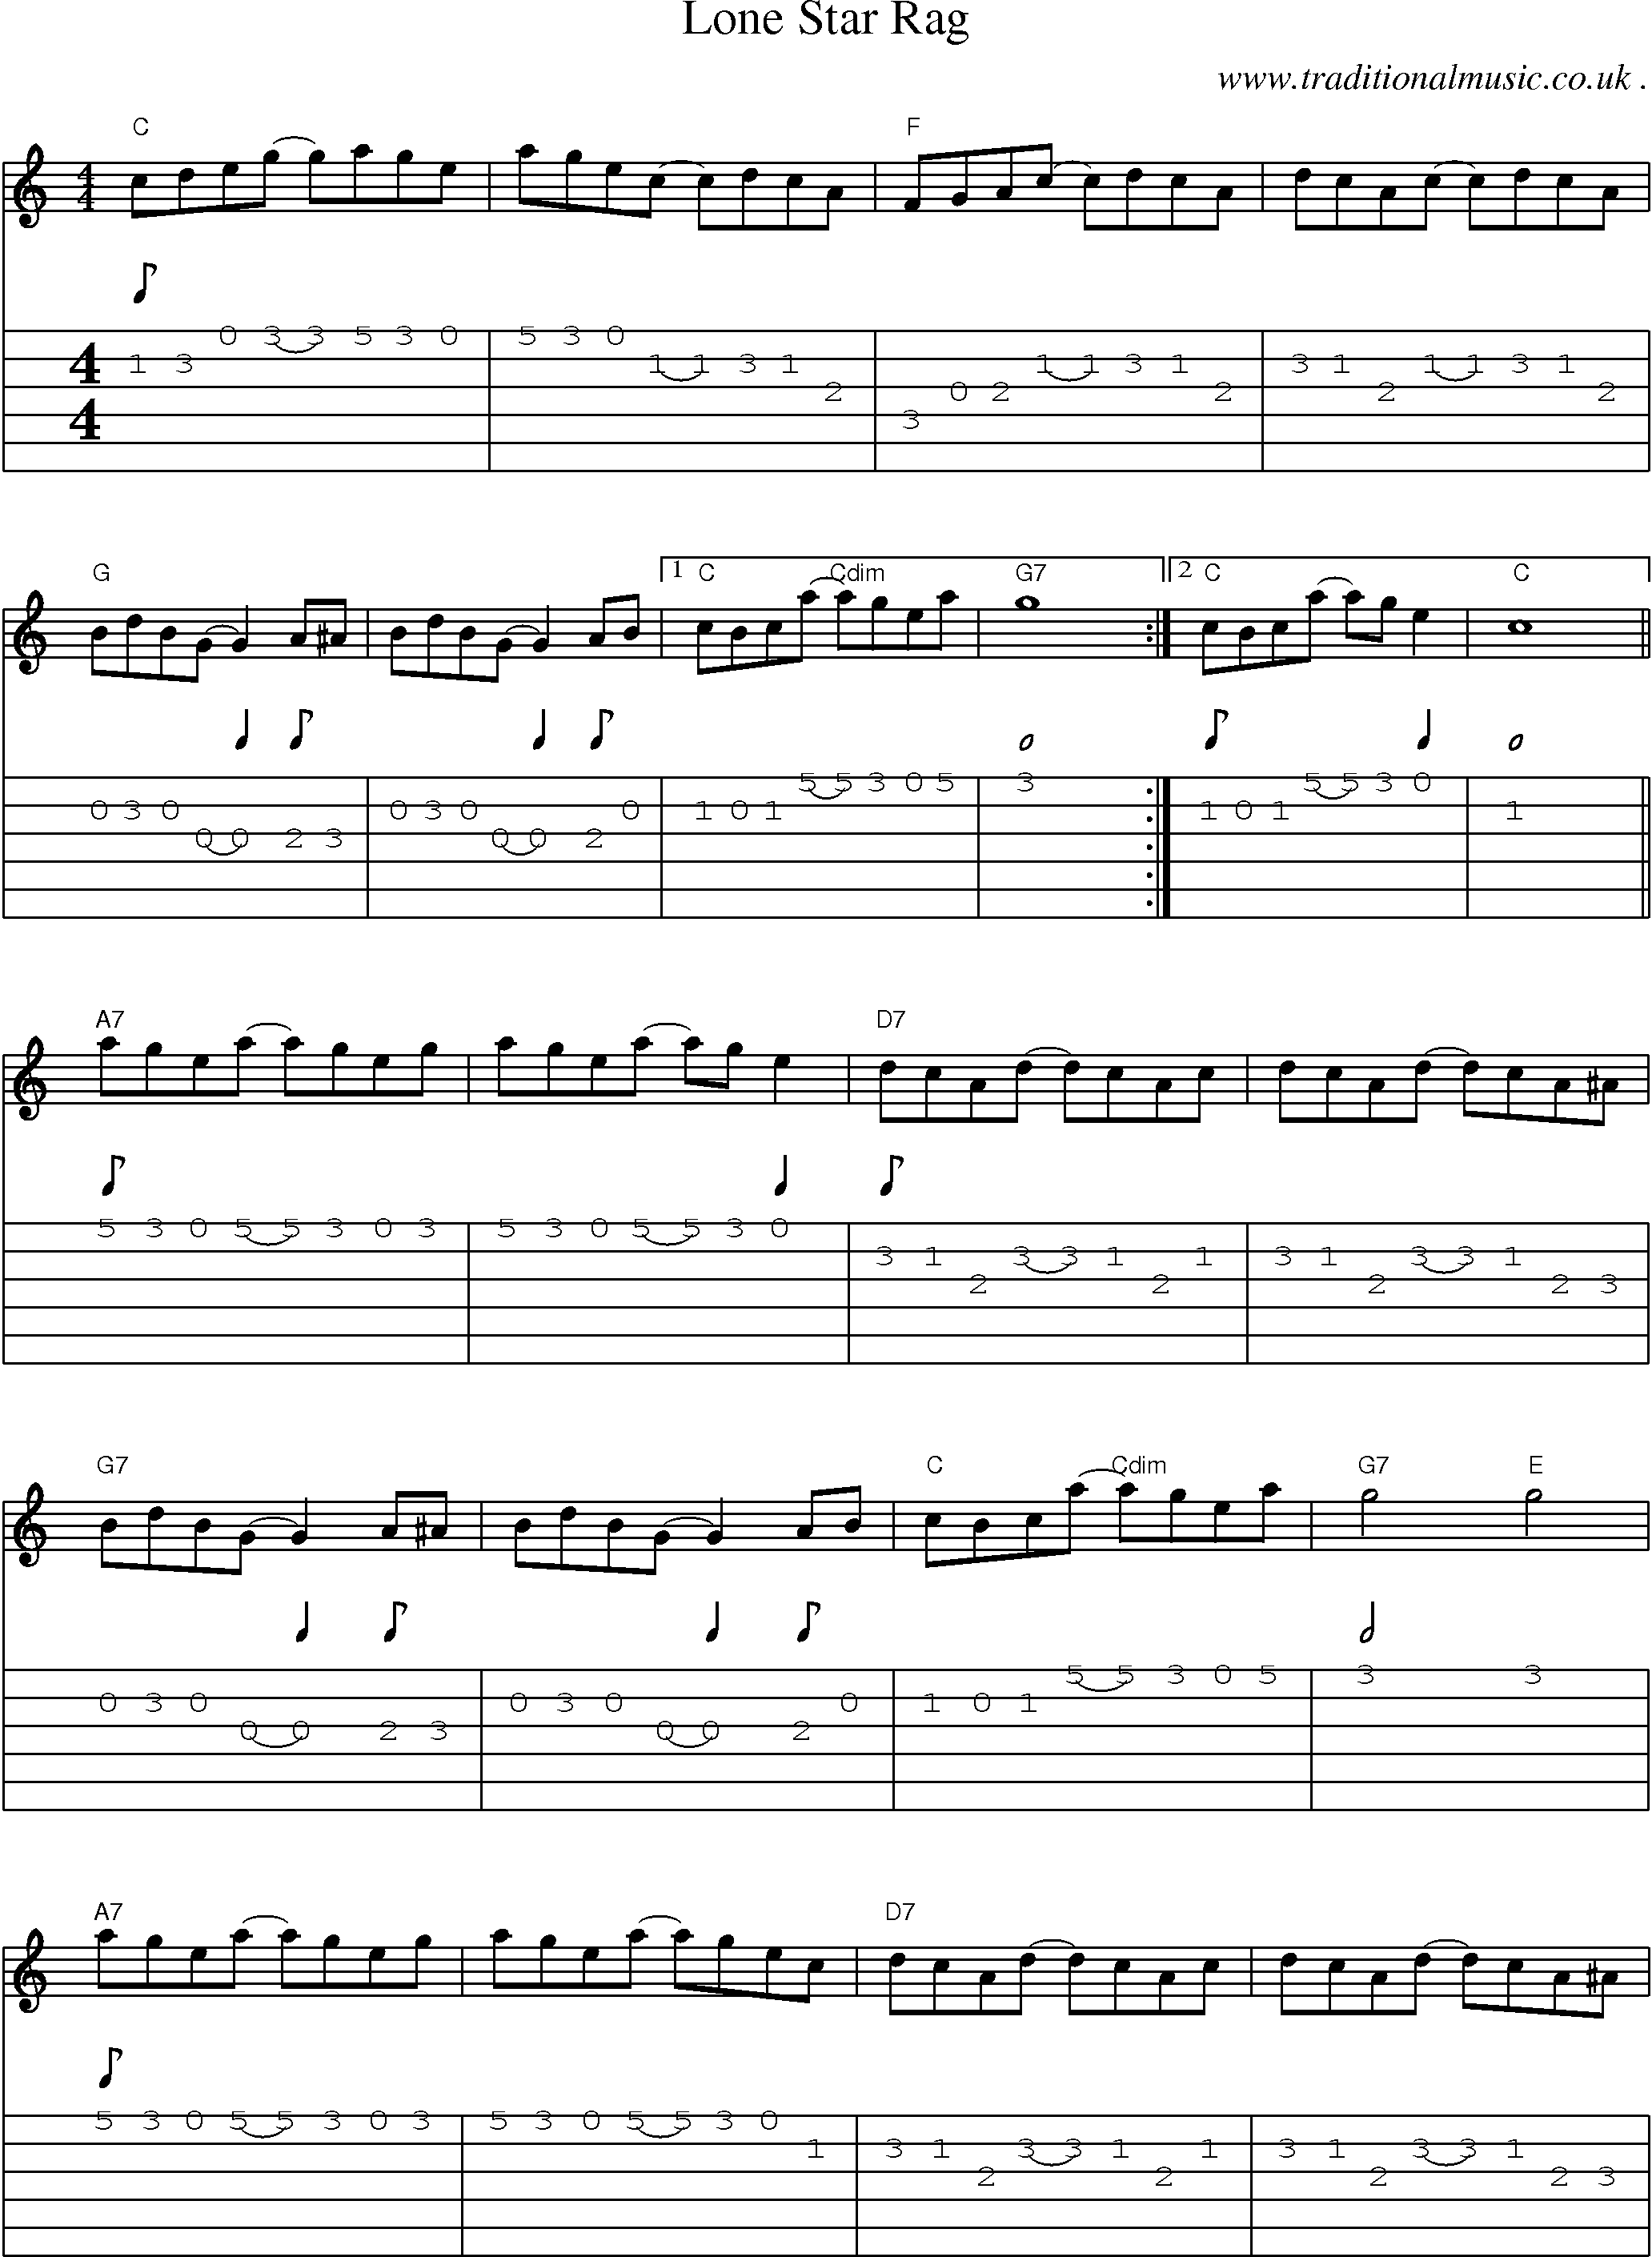 Music Score and Guitar Tabs for Lone Star Rag